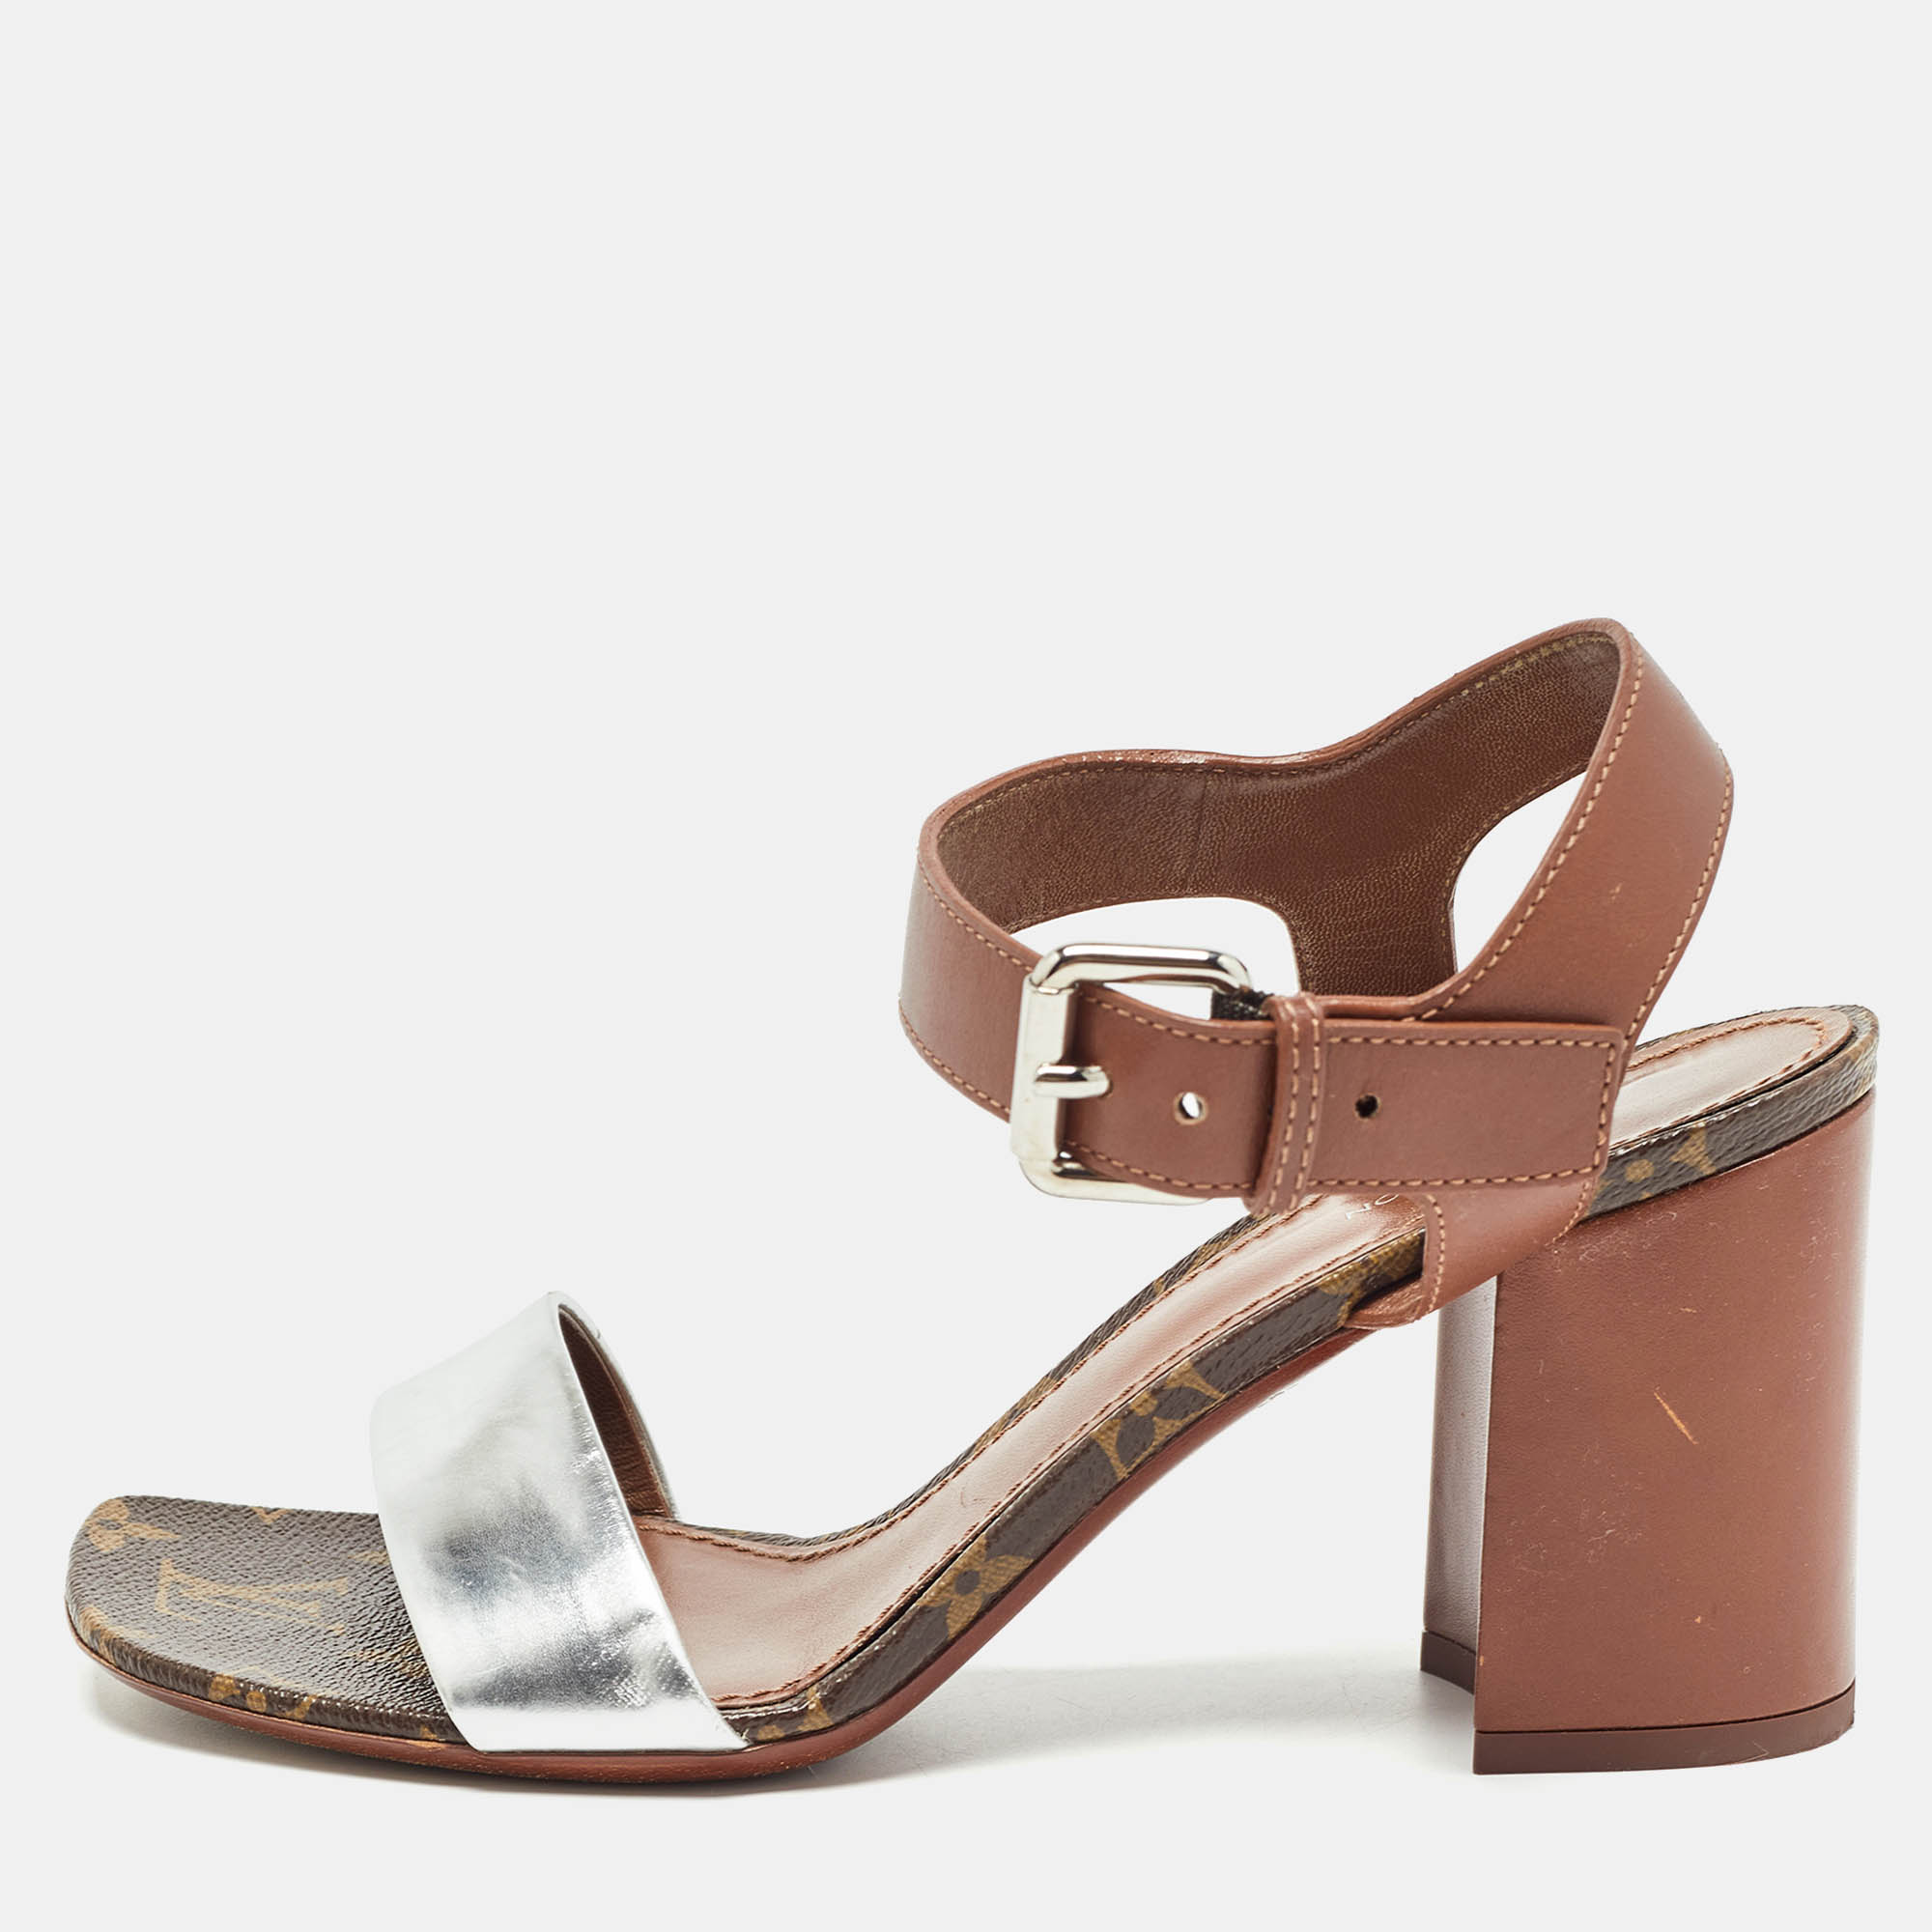 Louis vuitton silver/brown leather bloom ankle strap sandals size 38.5